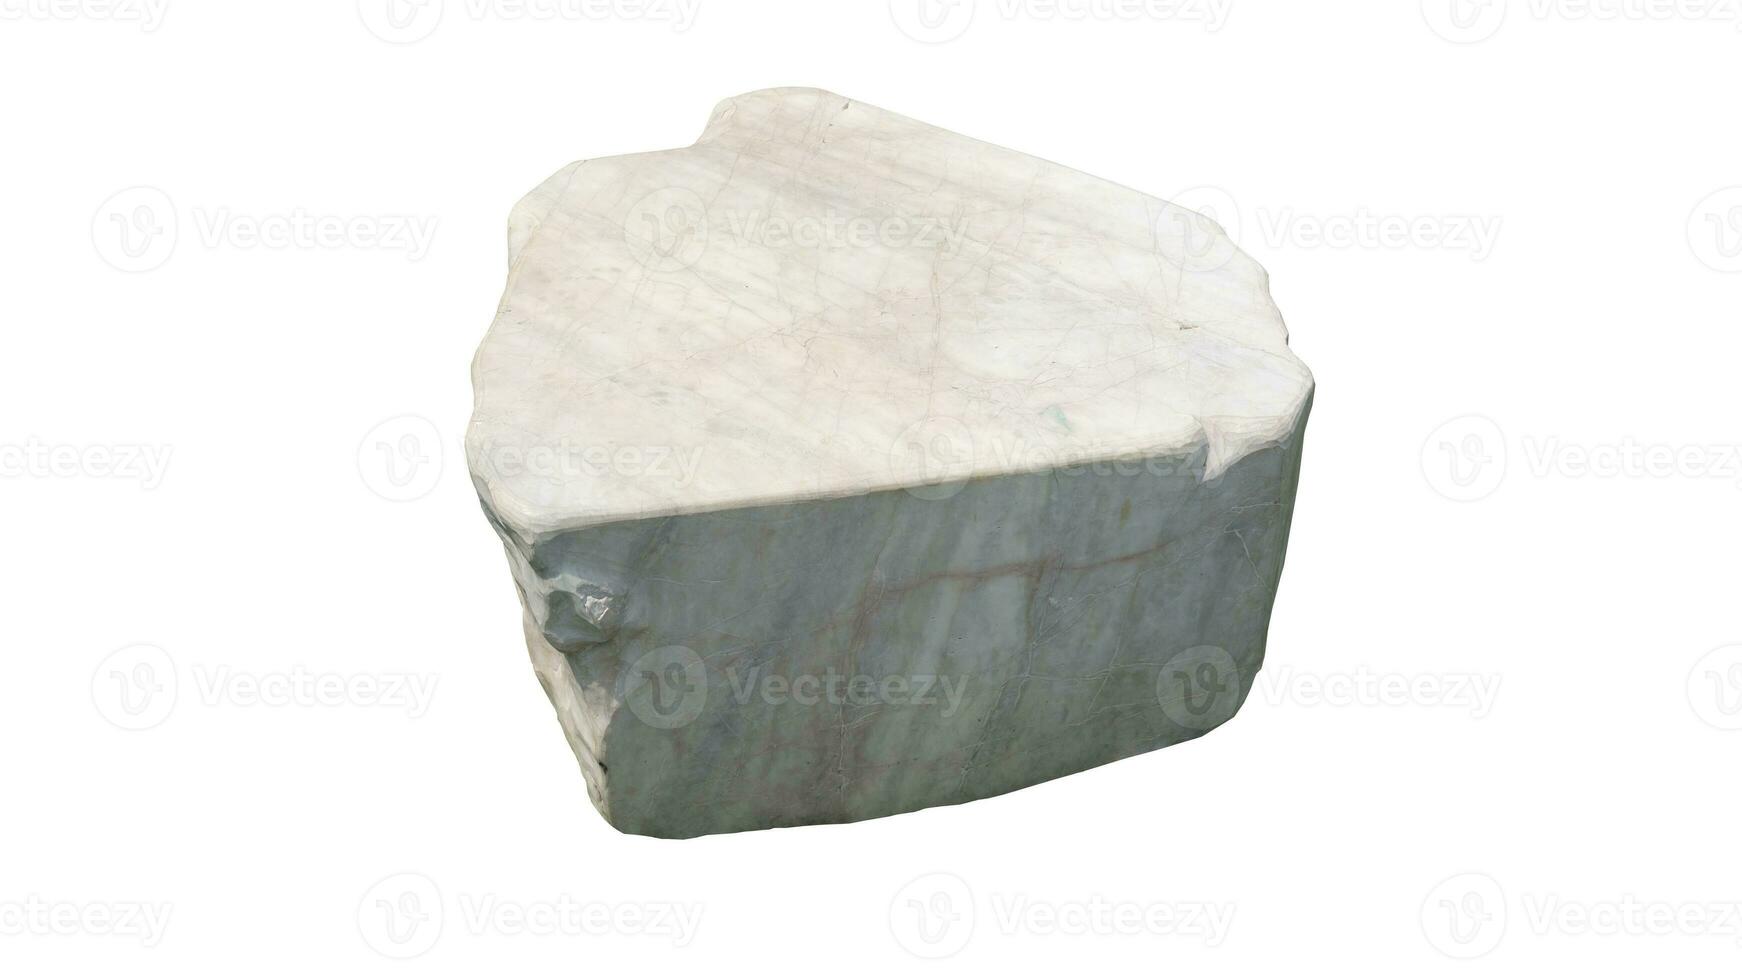 Chair outdoor made from granite stone. Stone surface is smooth and soft white. on isolated white background with clipping path. photo